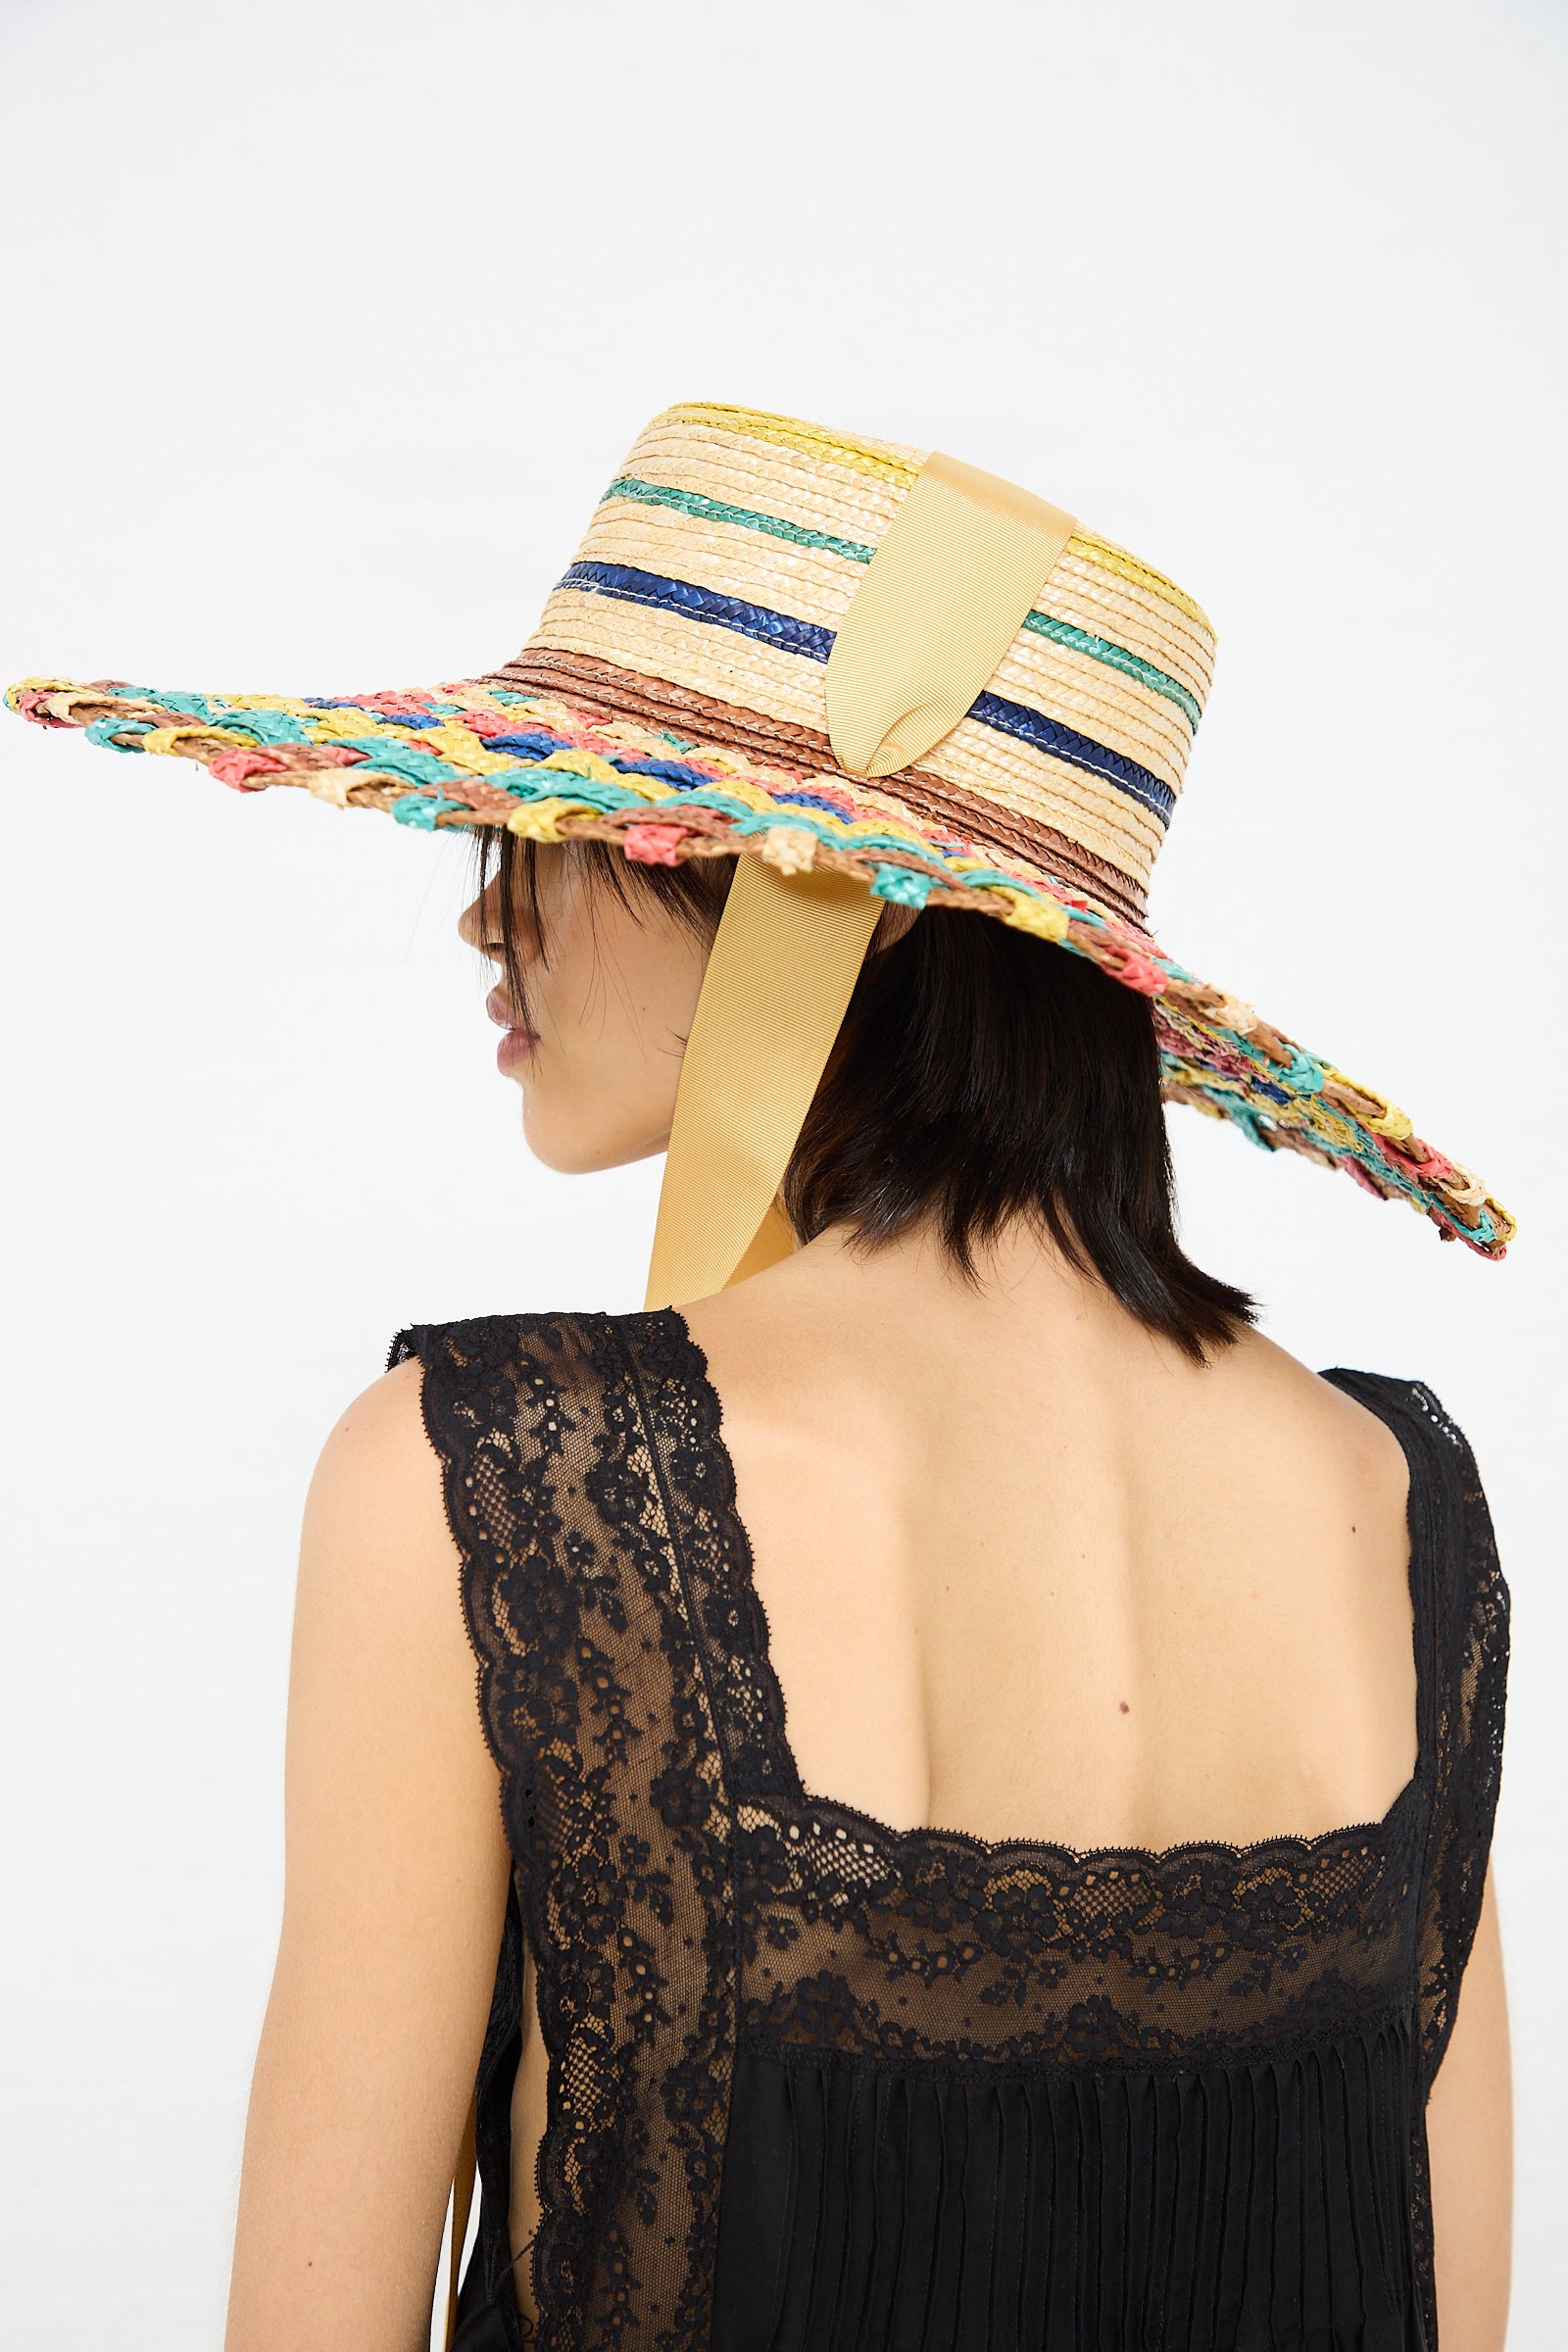 A woman with short dark hair is shown from the side wearing a handmade sun hat with a wide brim and a lace black top. The multicolored Zahati Straw Cuchi Tris-Tras No. 94 Hat with Laces has a yellow ribbon hanging from it.